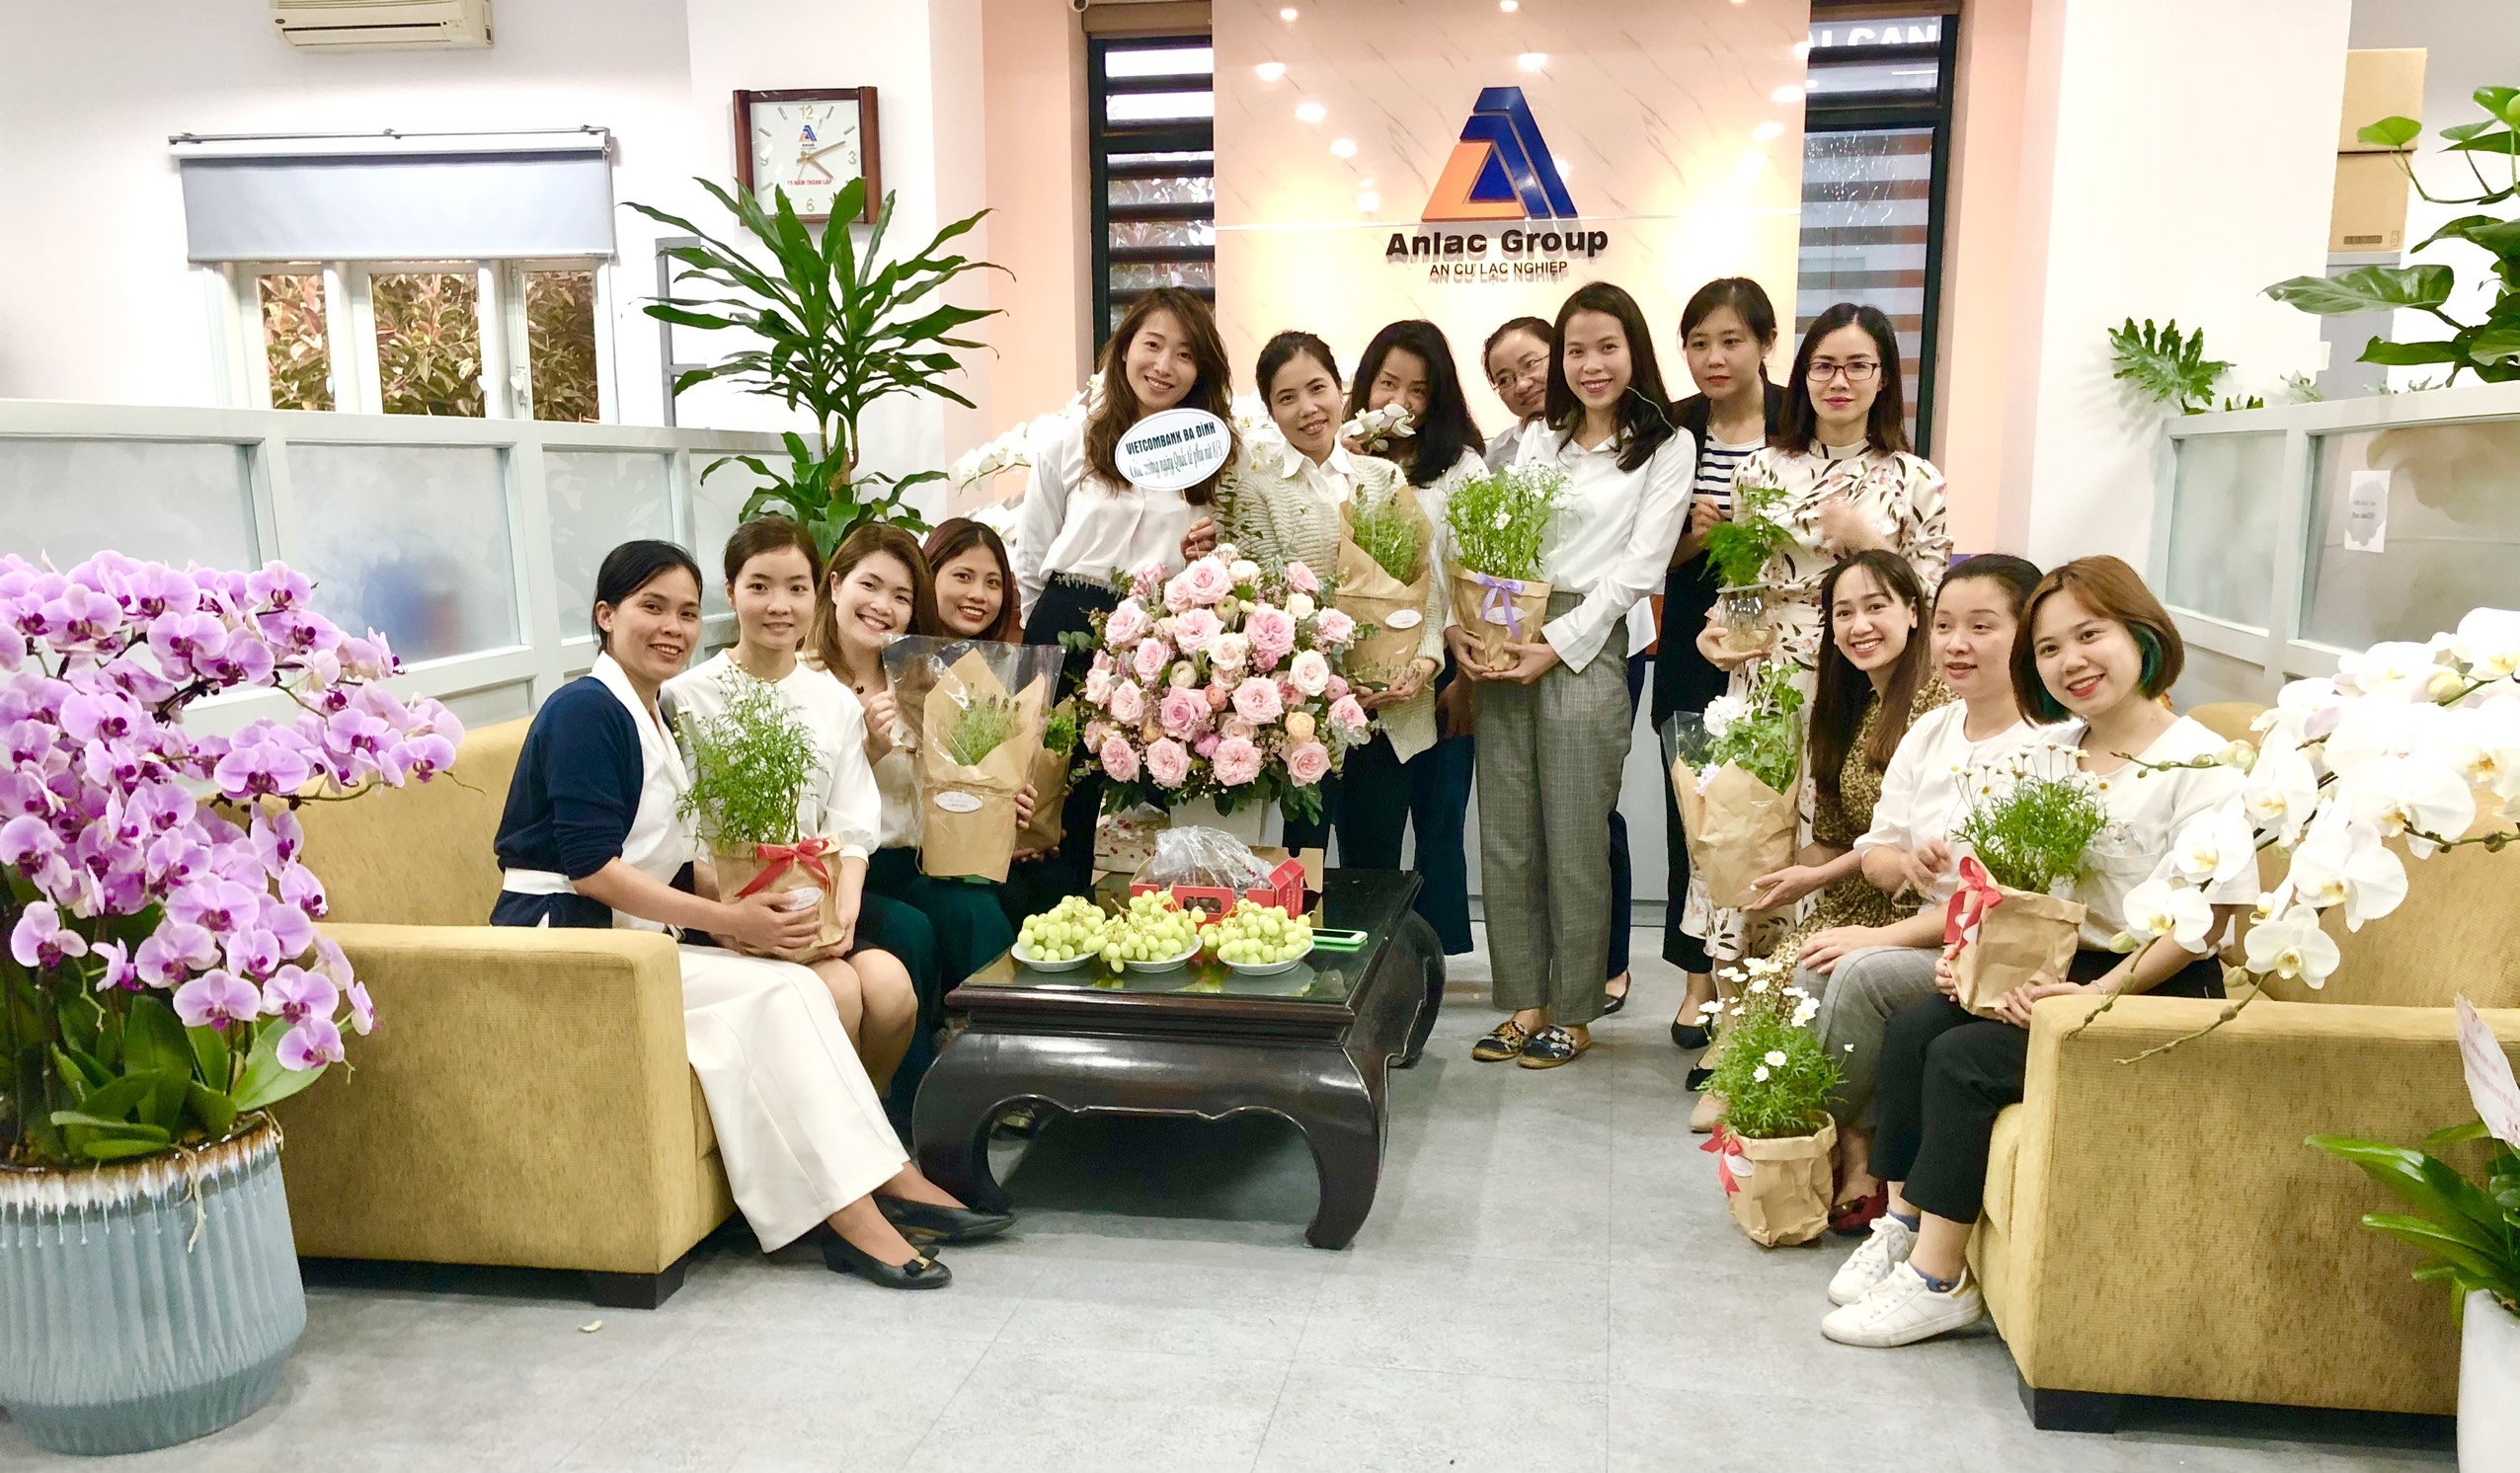 Anlac Group: Happy women’s day